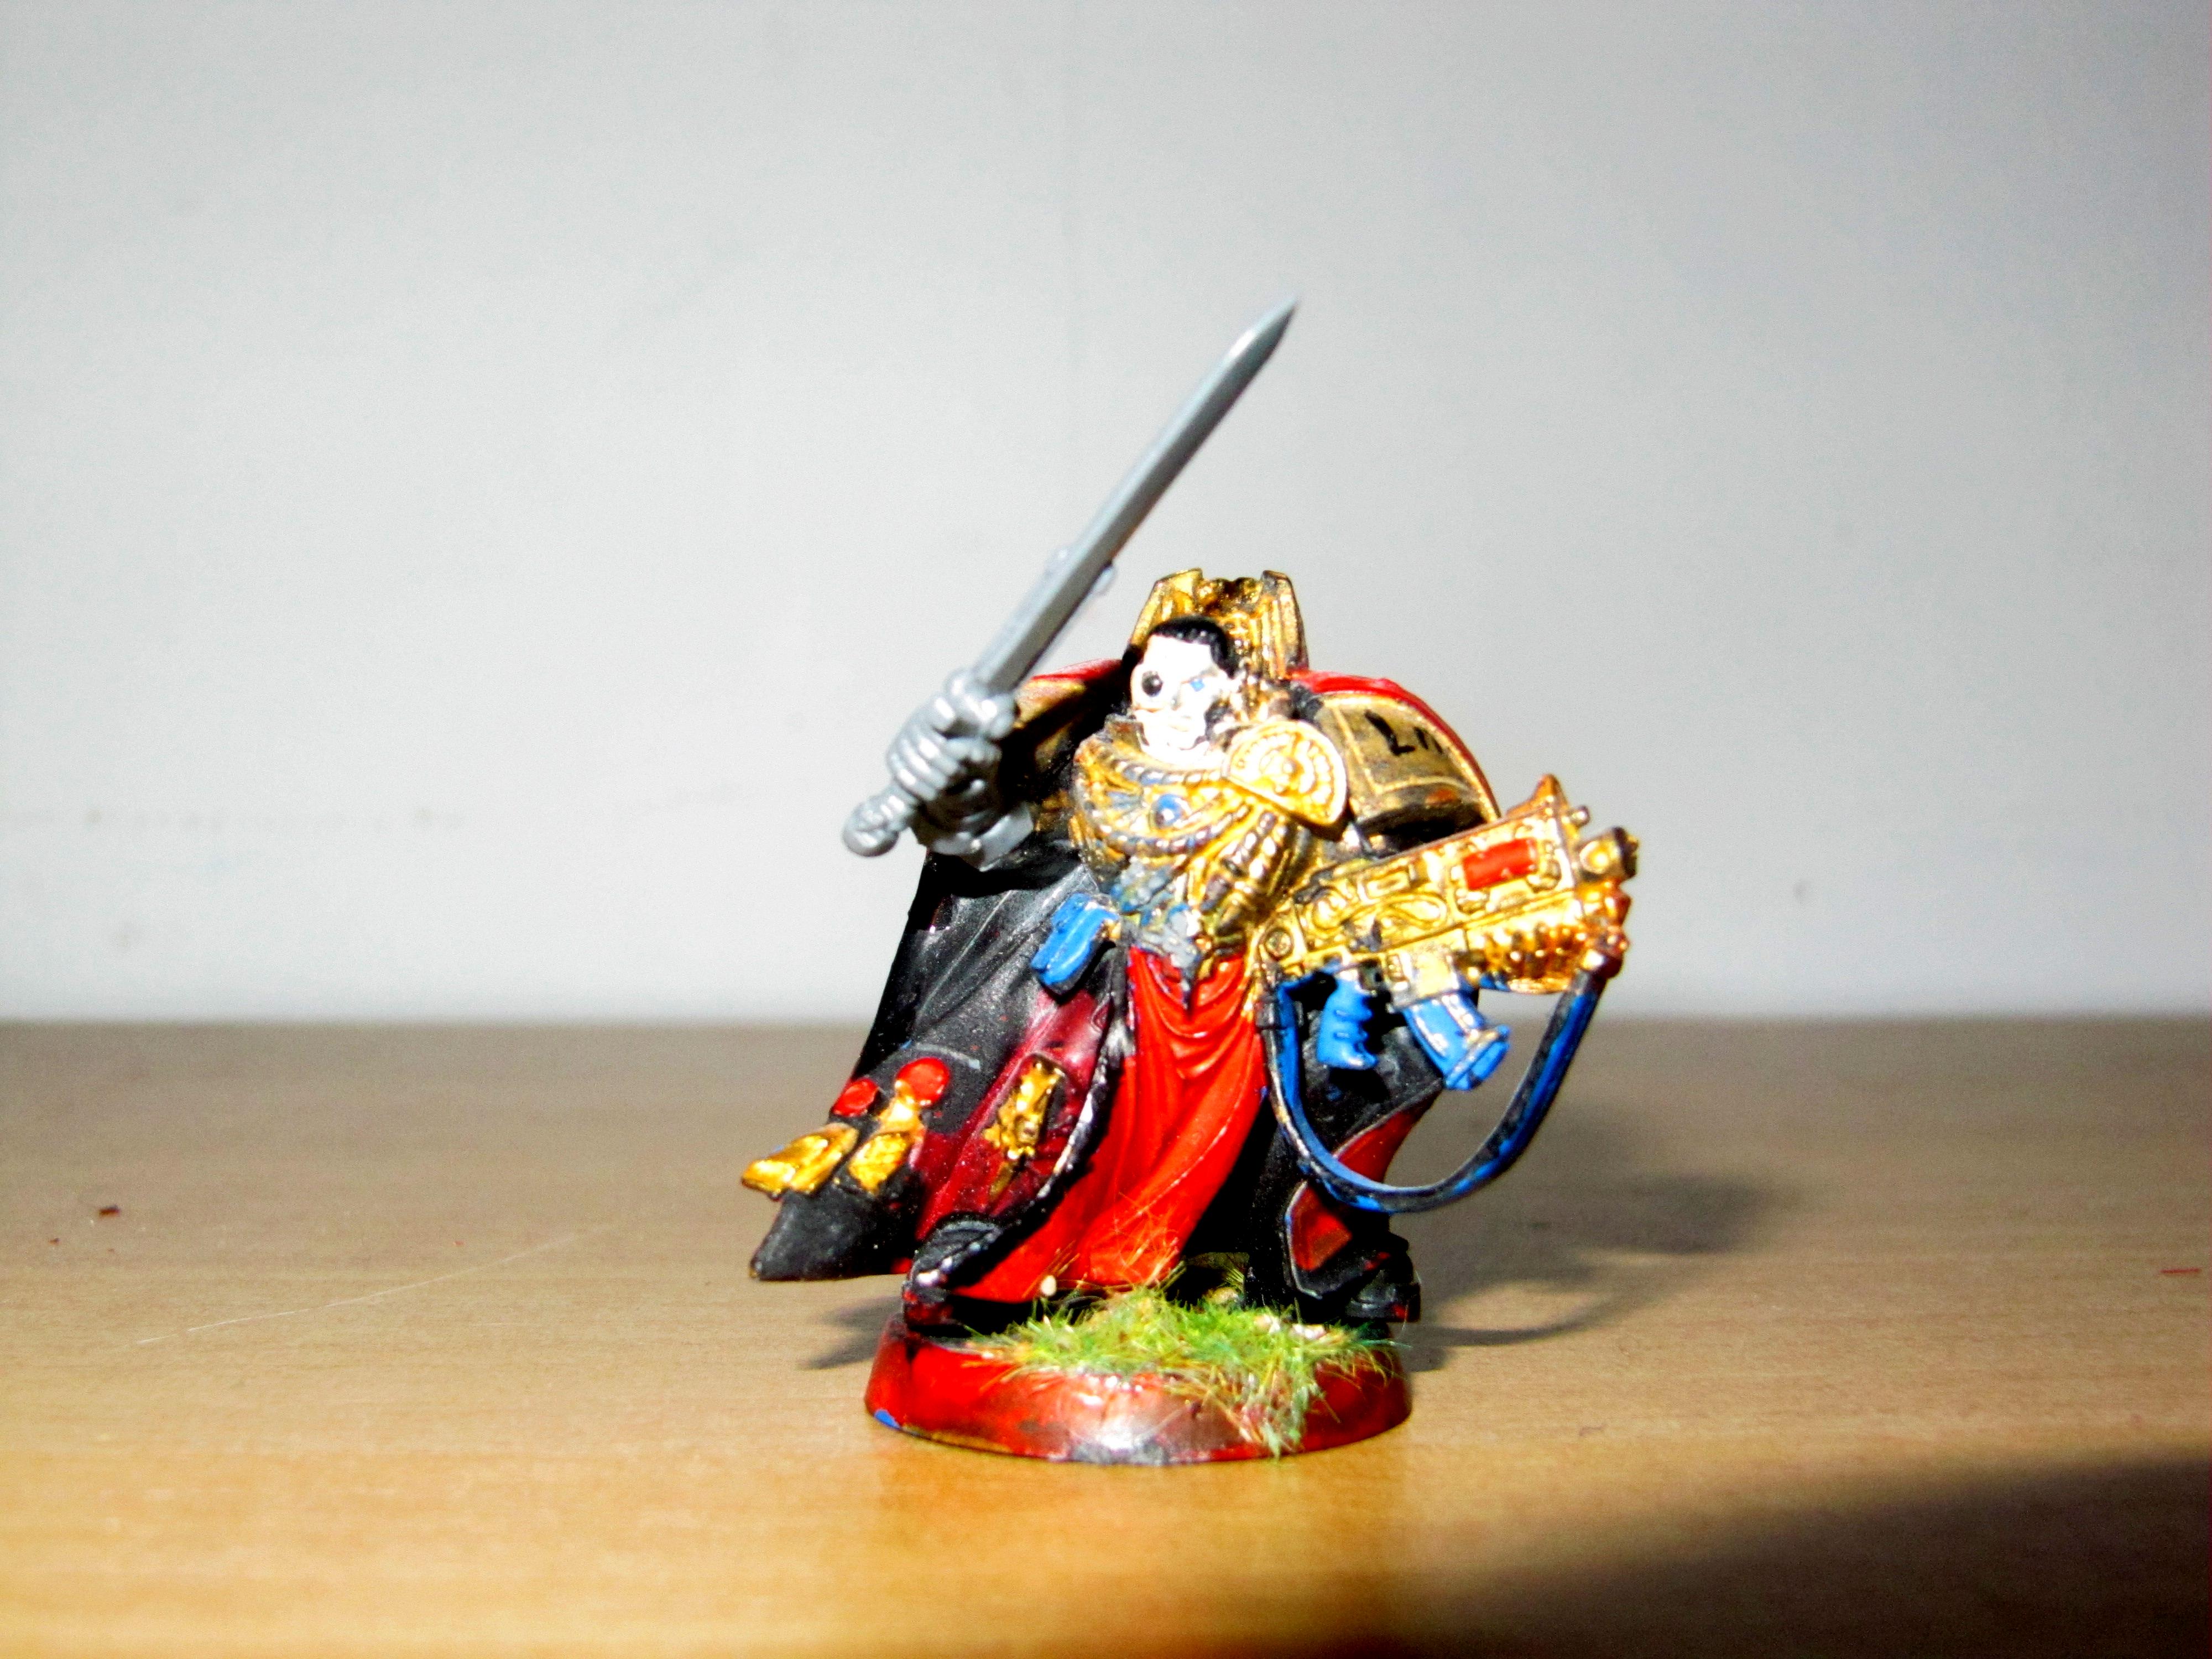 Cato Sicarius with Power Sword (No backpack)